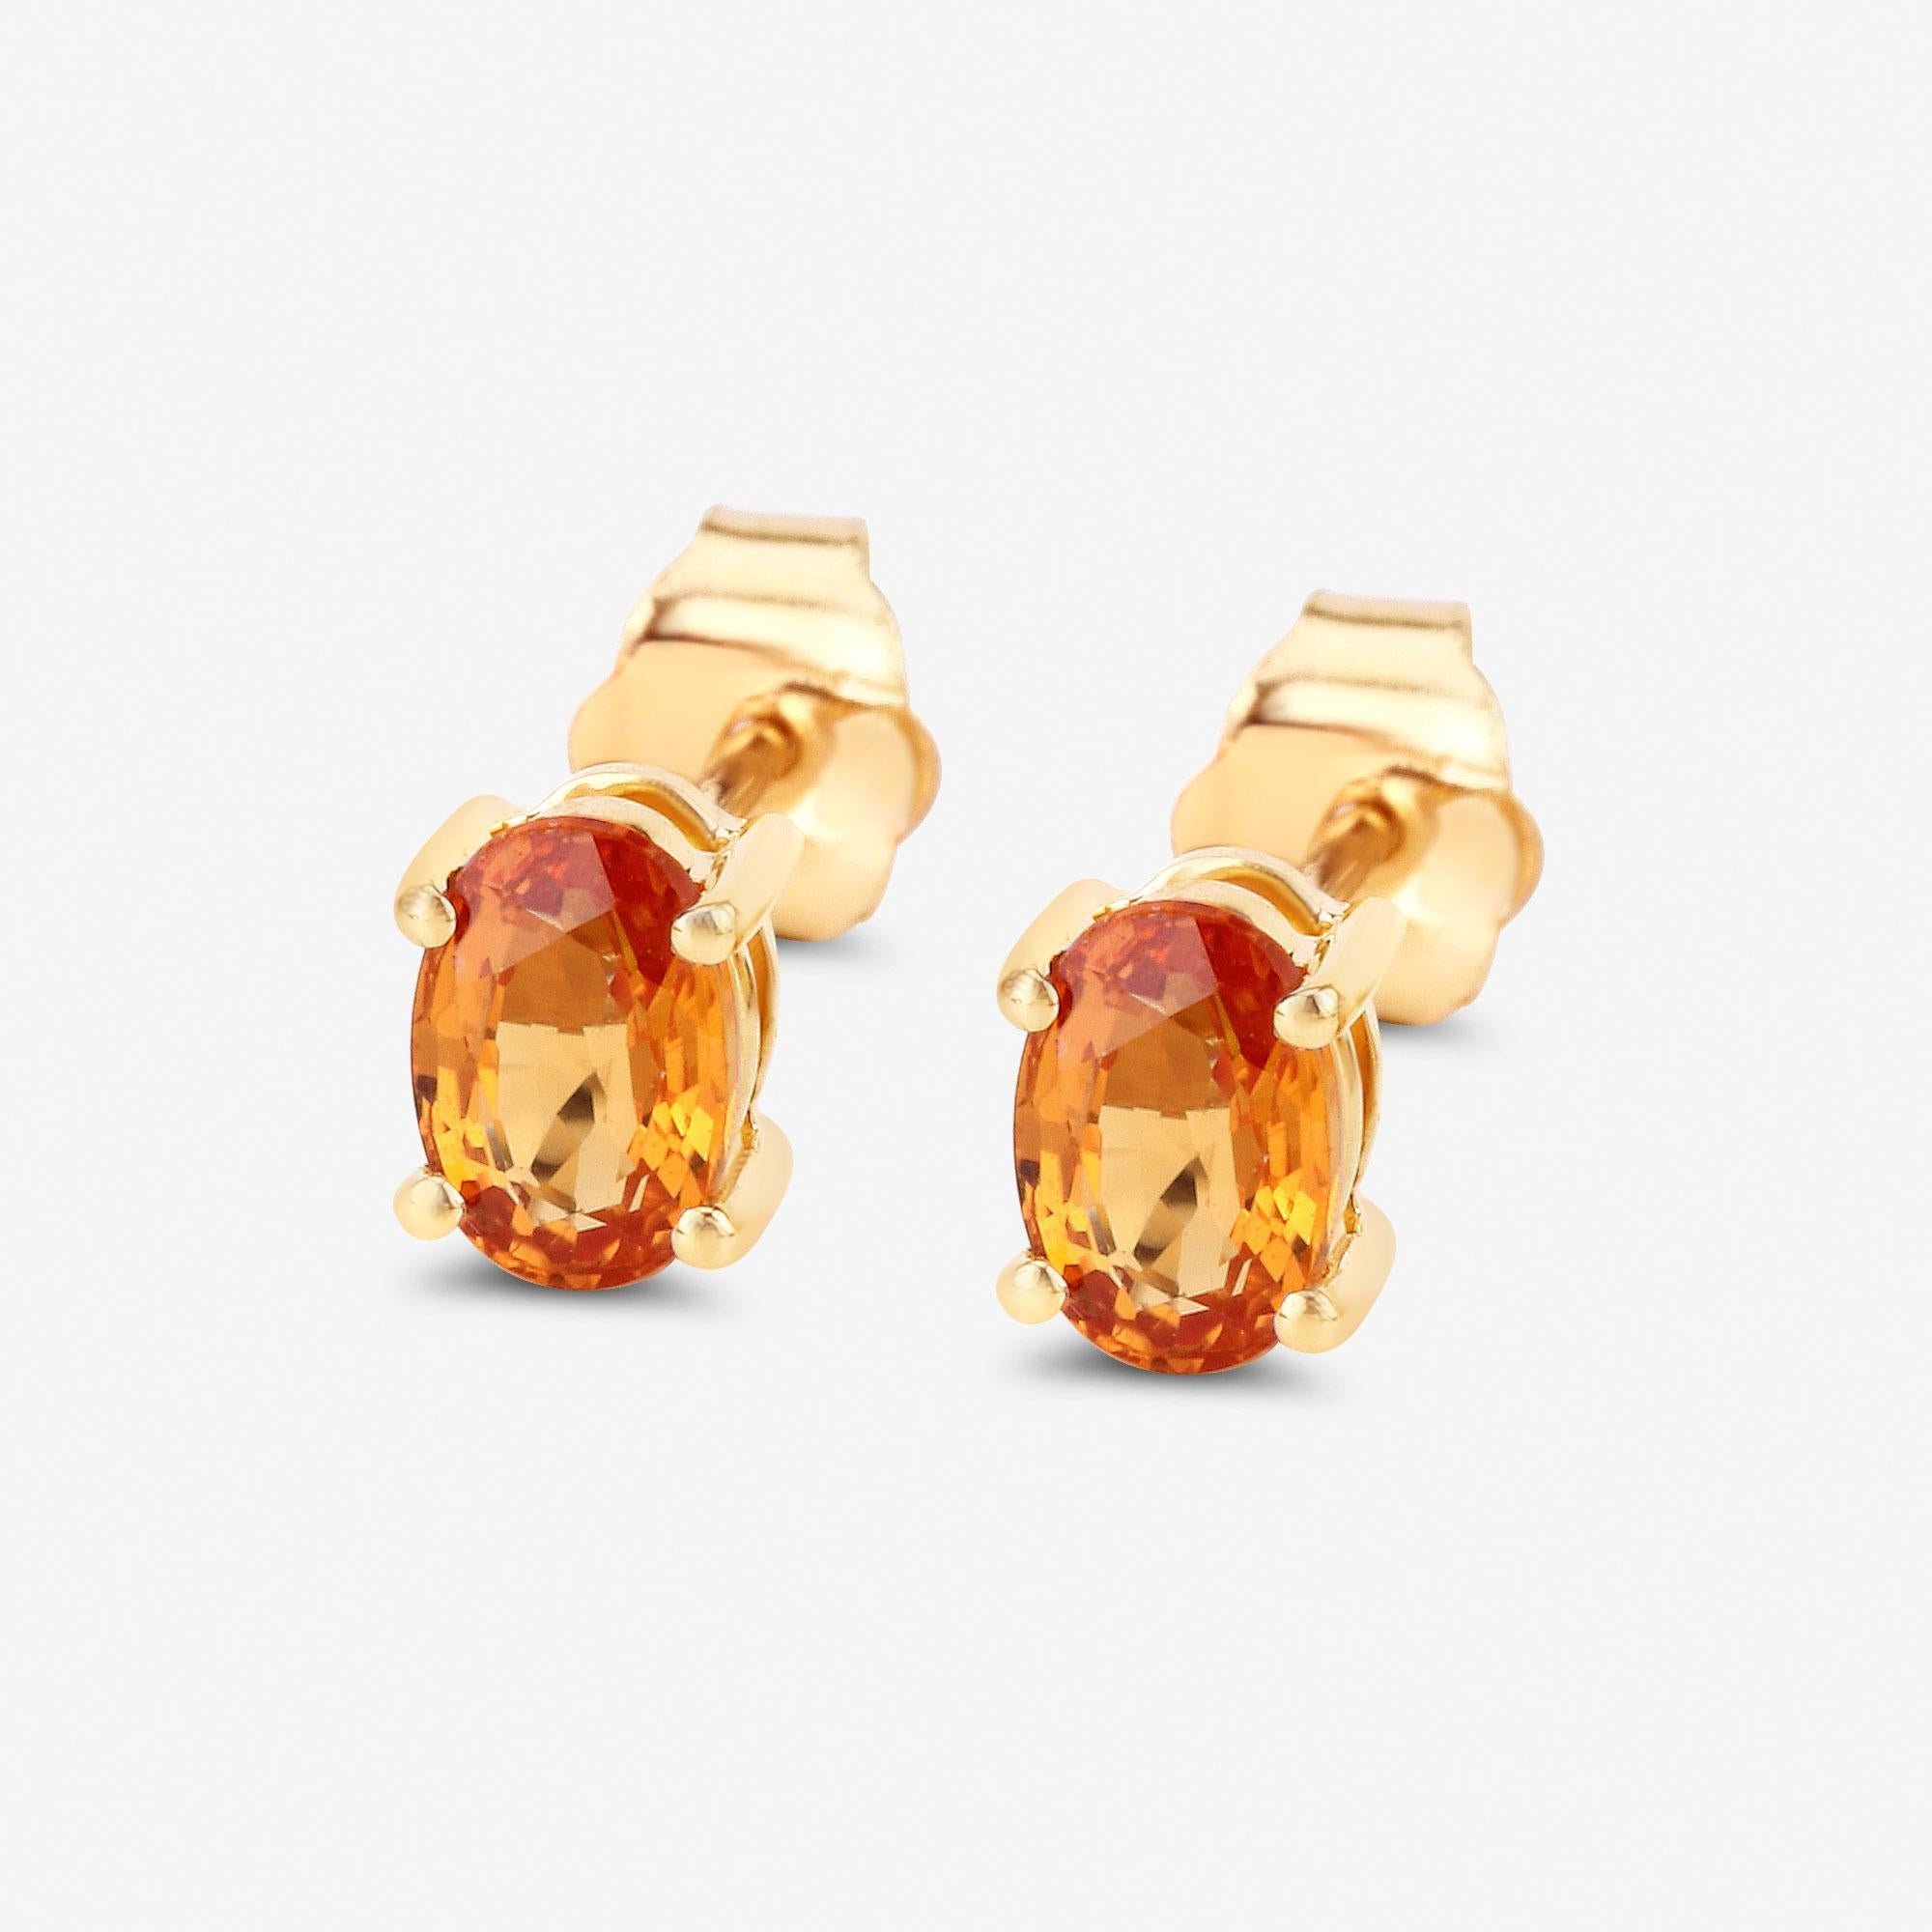 Orange Sapphire Stud Earrings 1.10 Carats Total 14K Yellow Gold In Excellent Condition For Sale In Laguna Niguel, CA